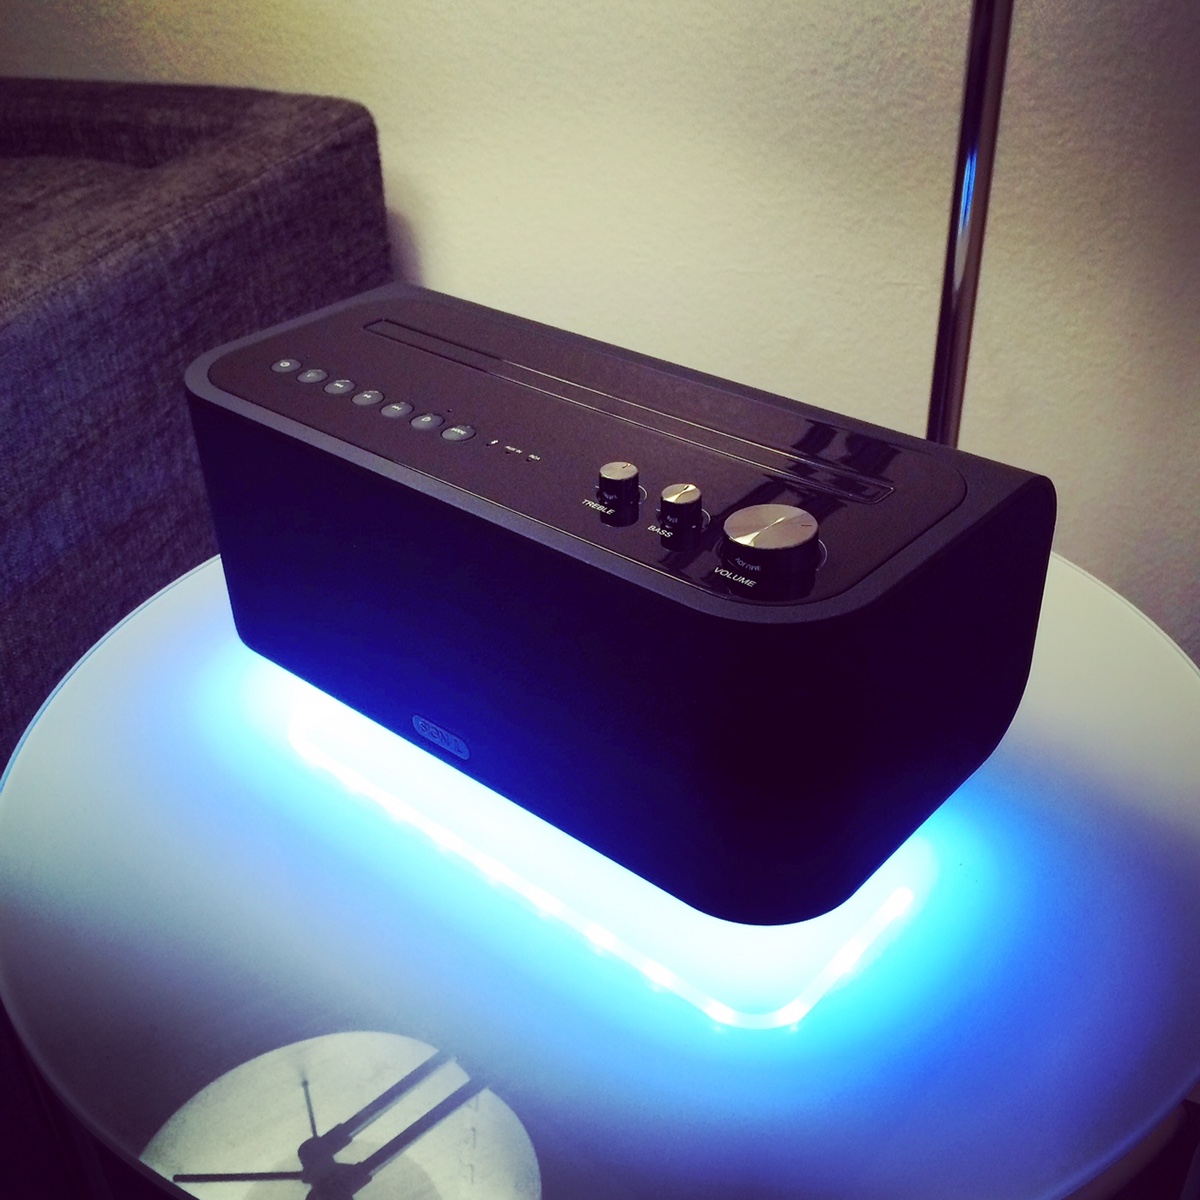 signal speaker apple Audio bluetooth charging dock michael ponce ponce iphone iPad ipod isound